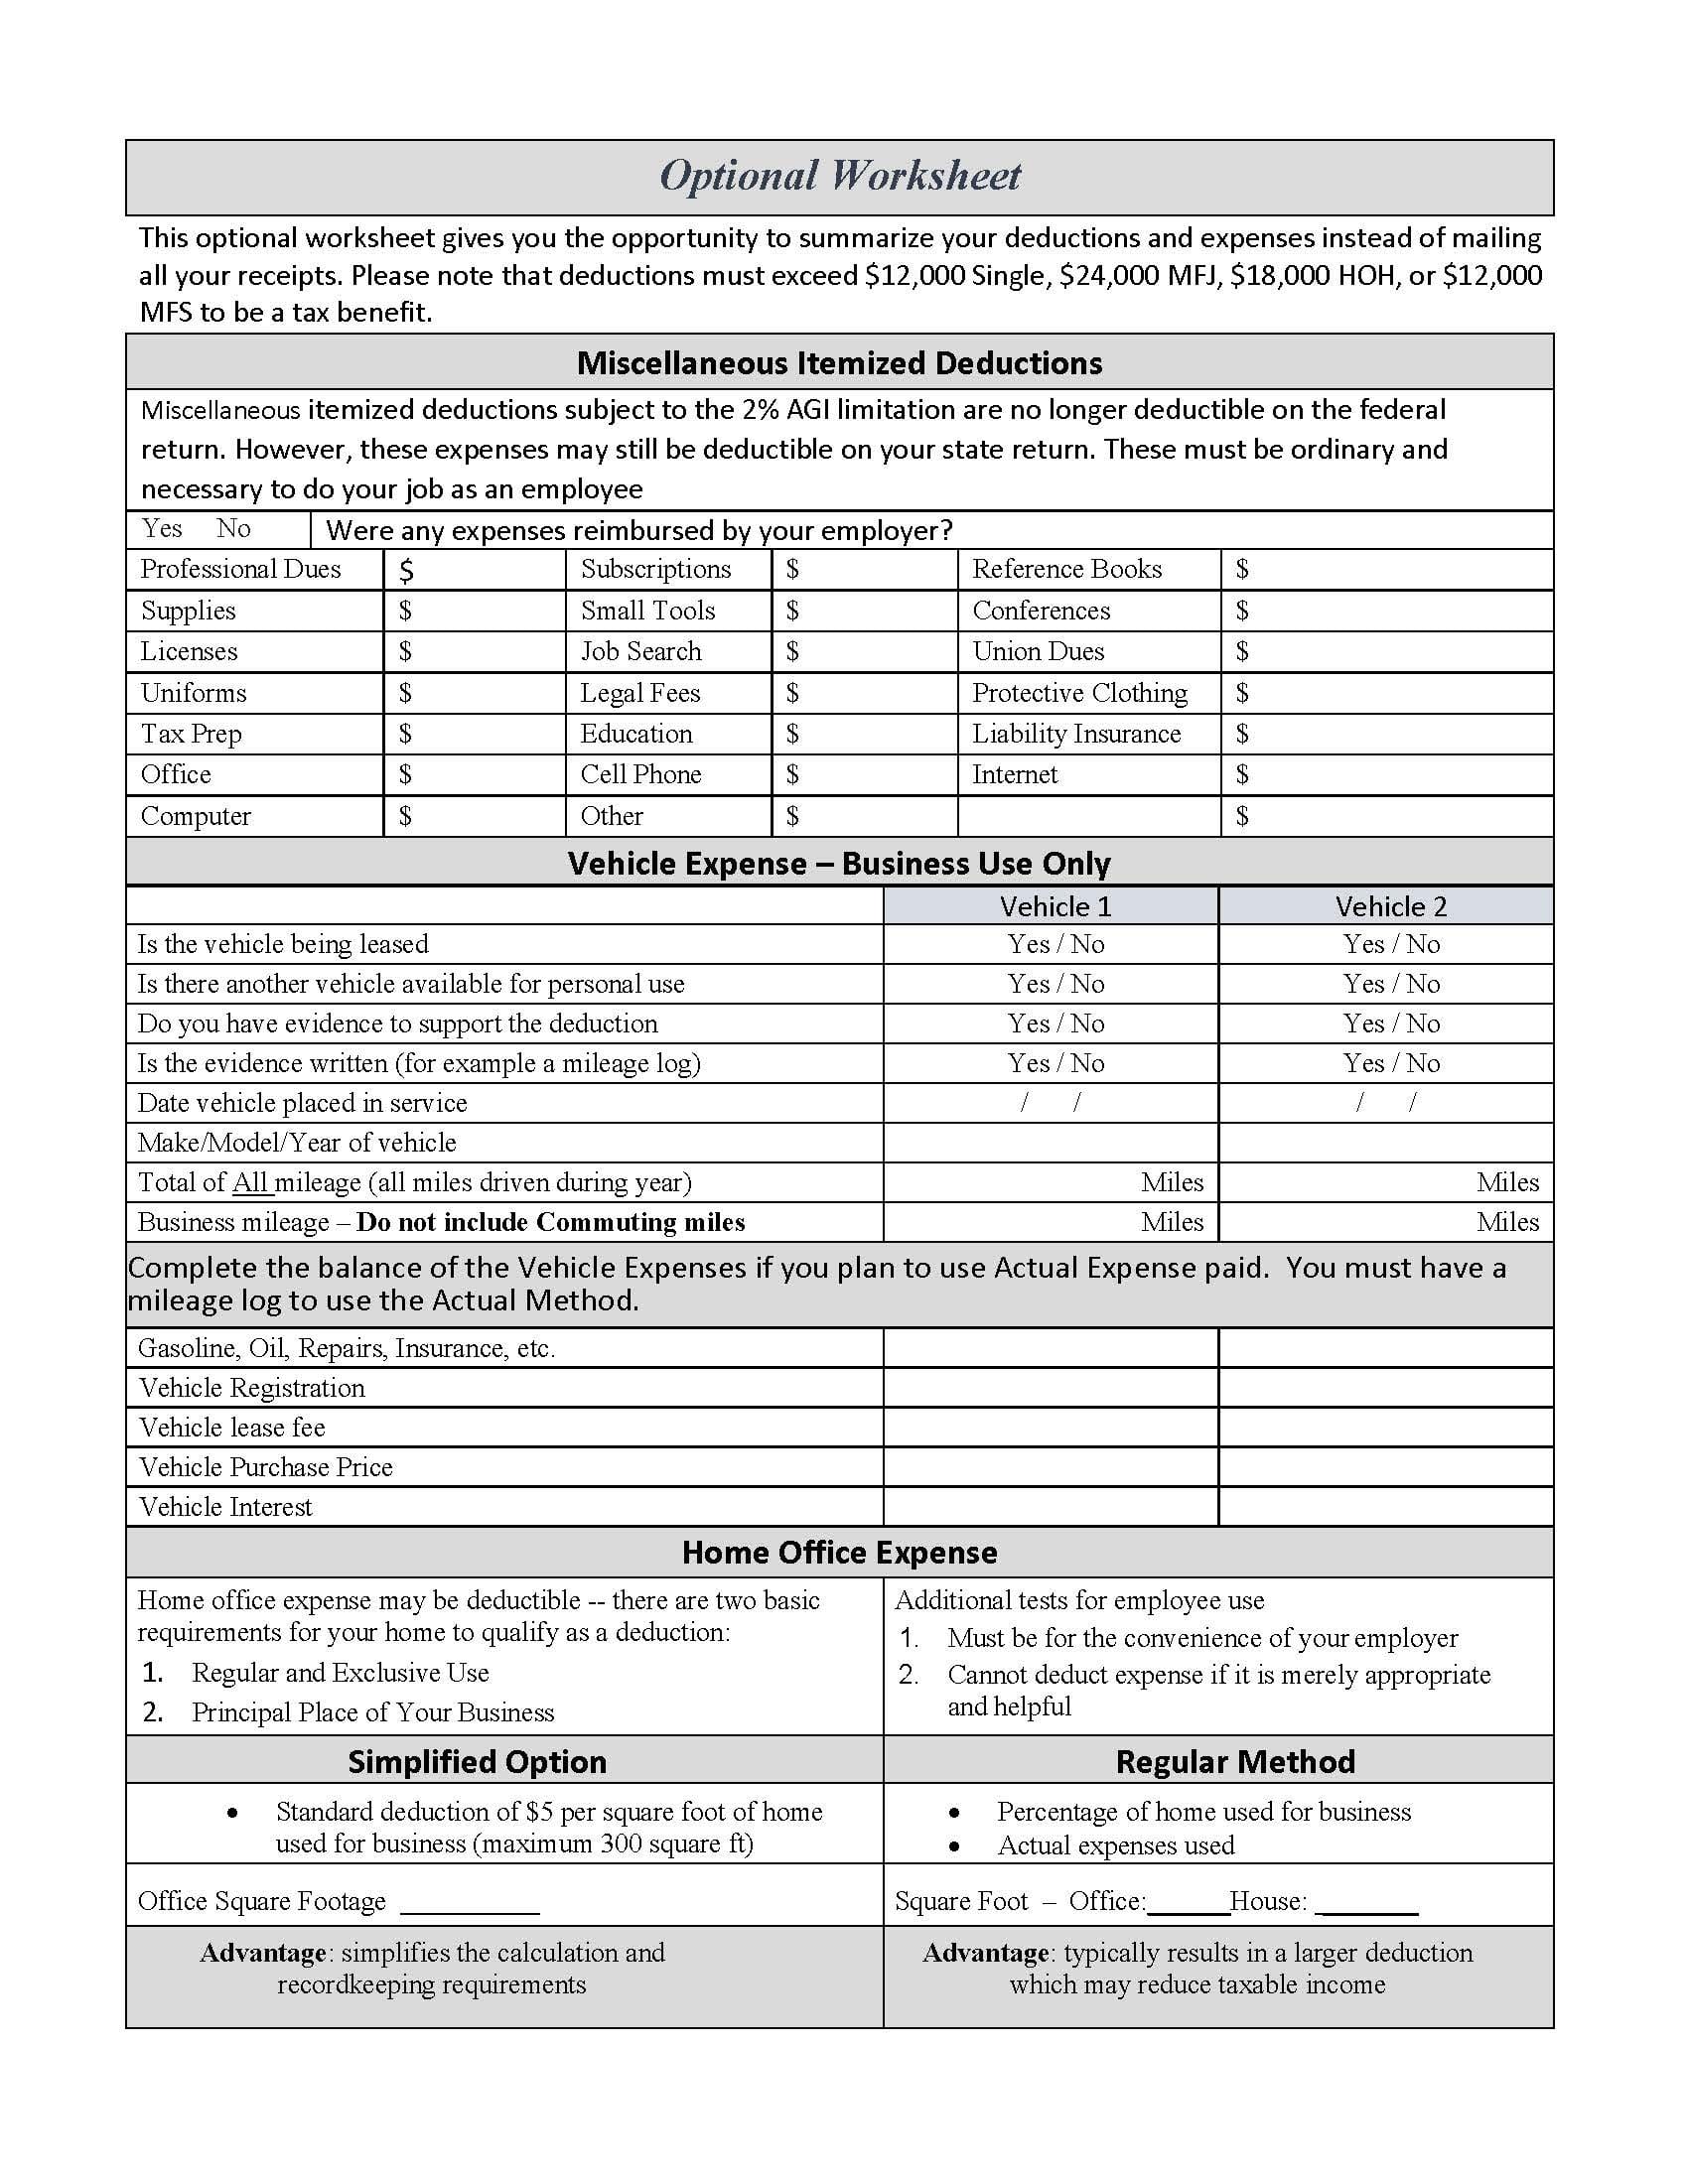 Computerized Income Tax Service Dearborn Mi Tax Preparation Firm As Well As Income Tax Worksheet